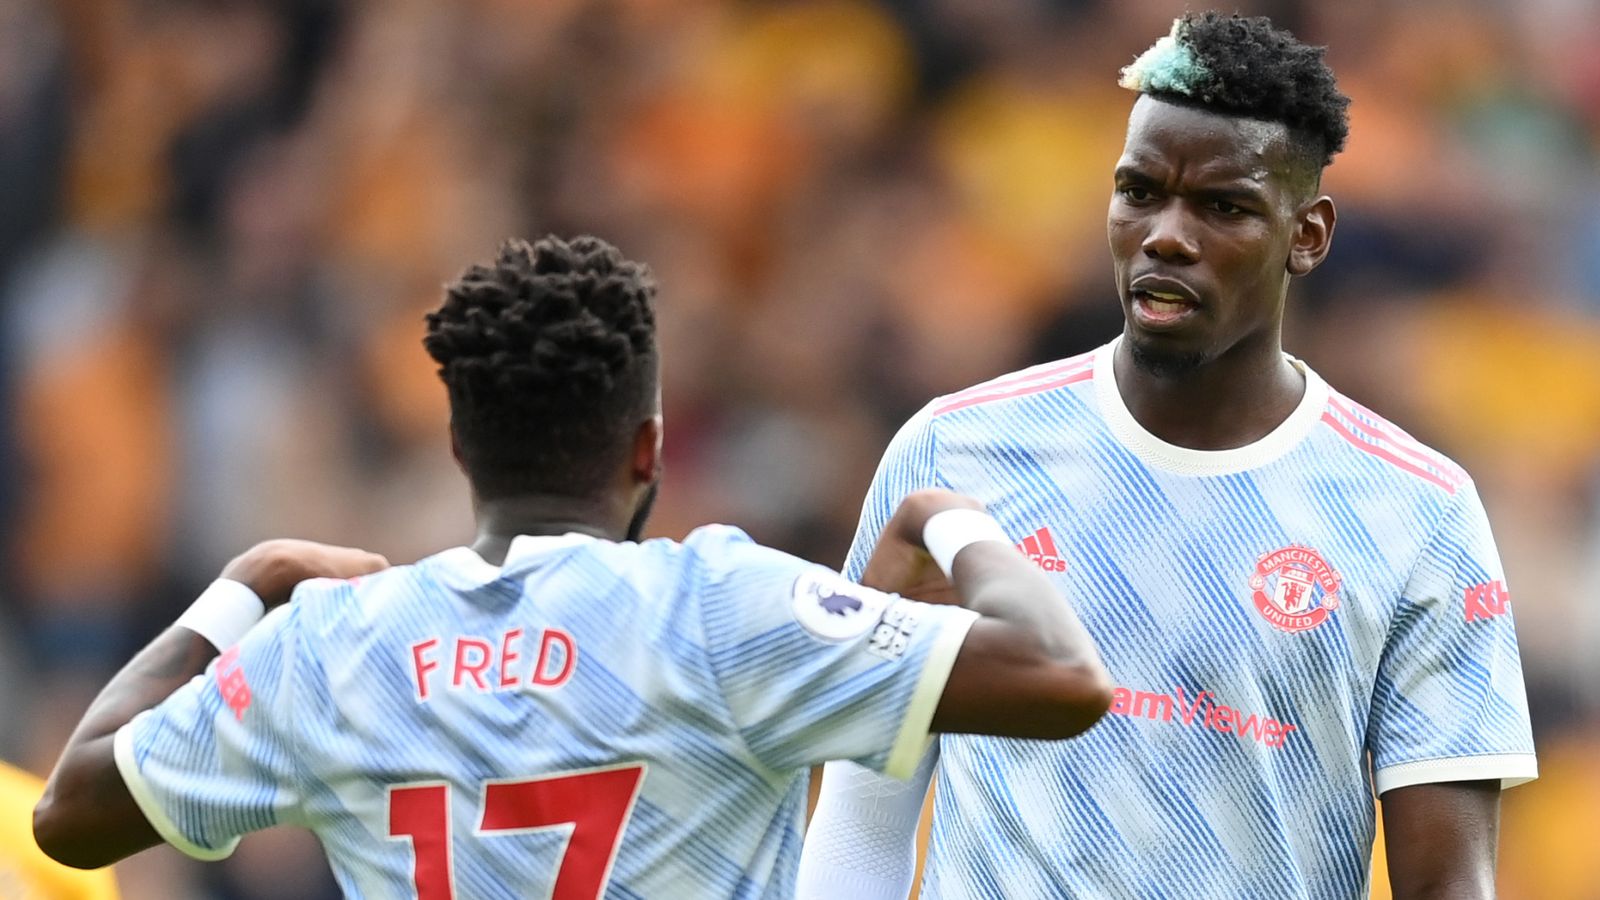 Manchester United’s midfield with Paul Pogba and Fred is too easy for teams to play through – balance could cost them